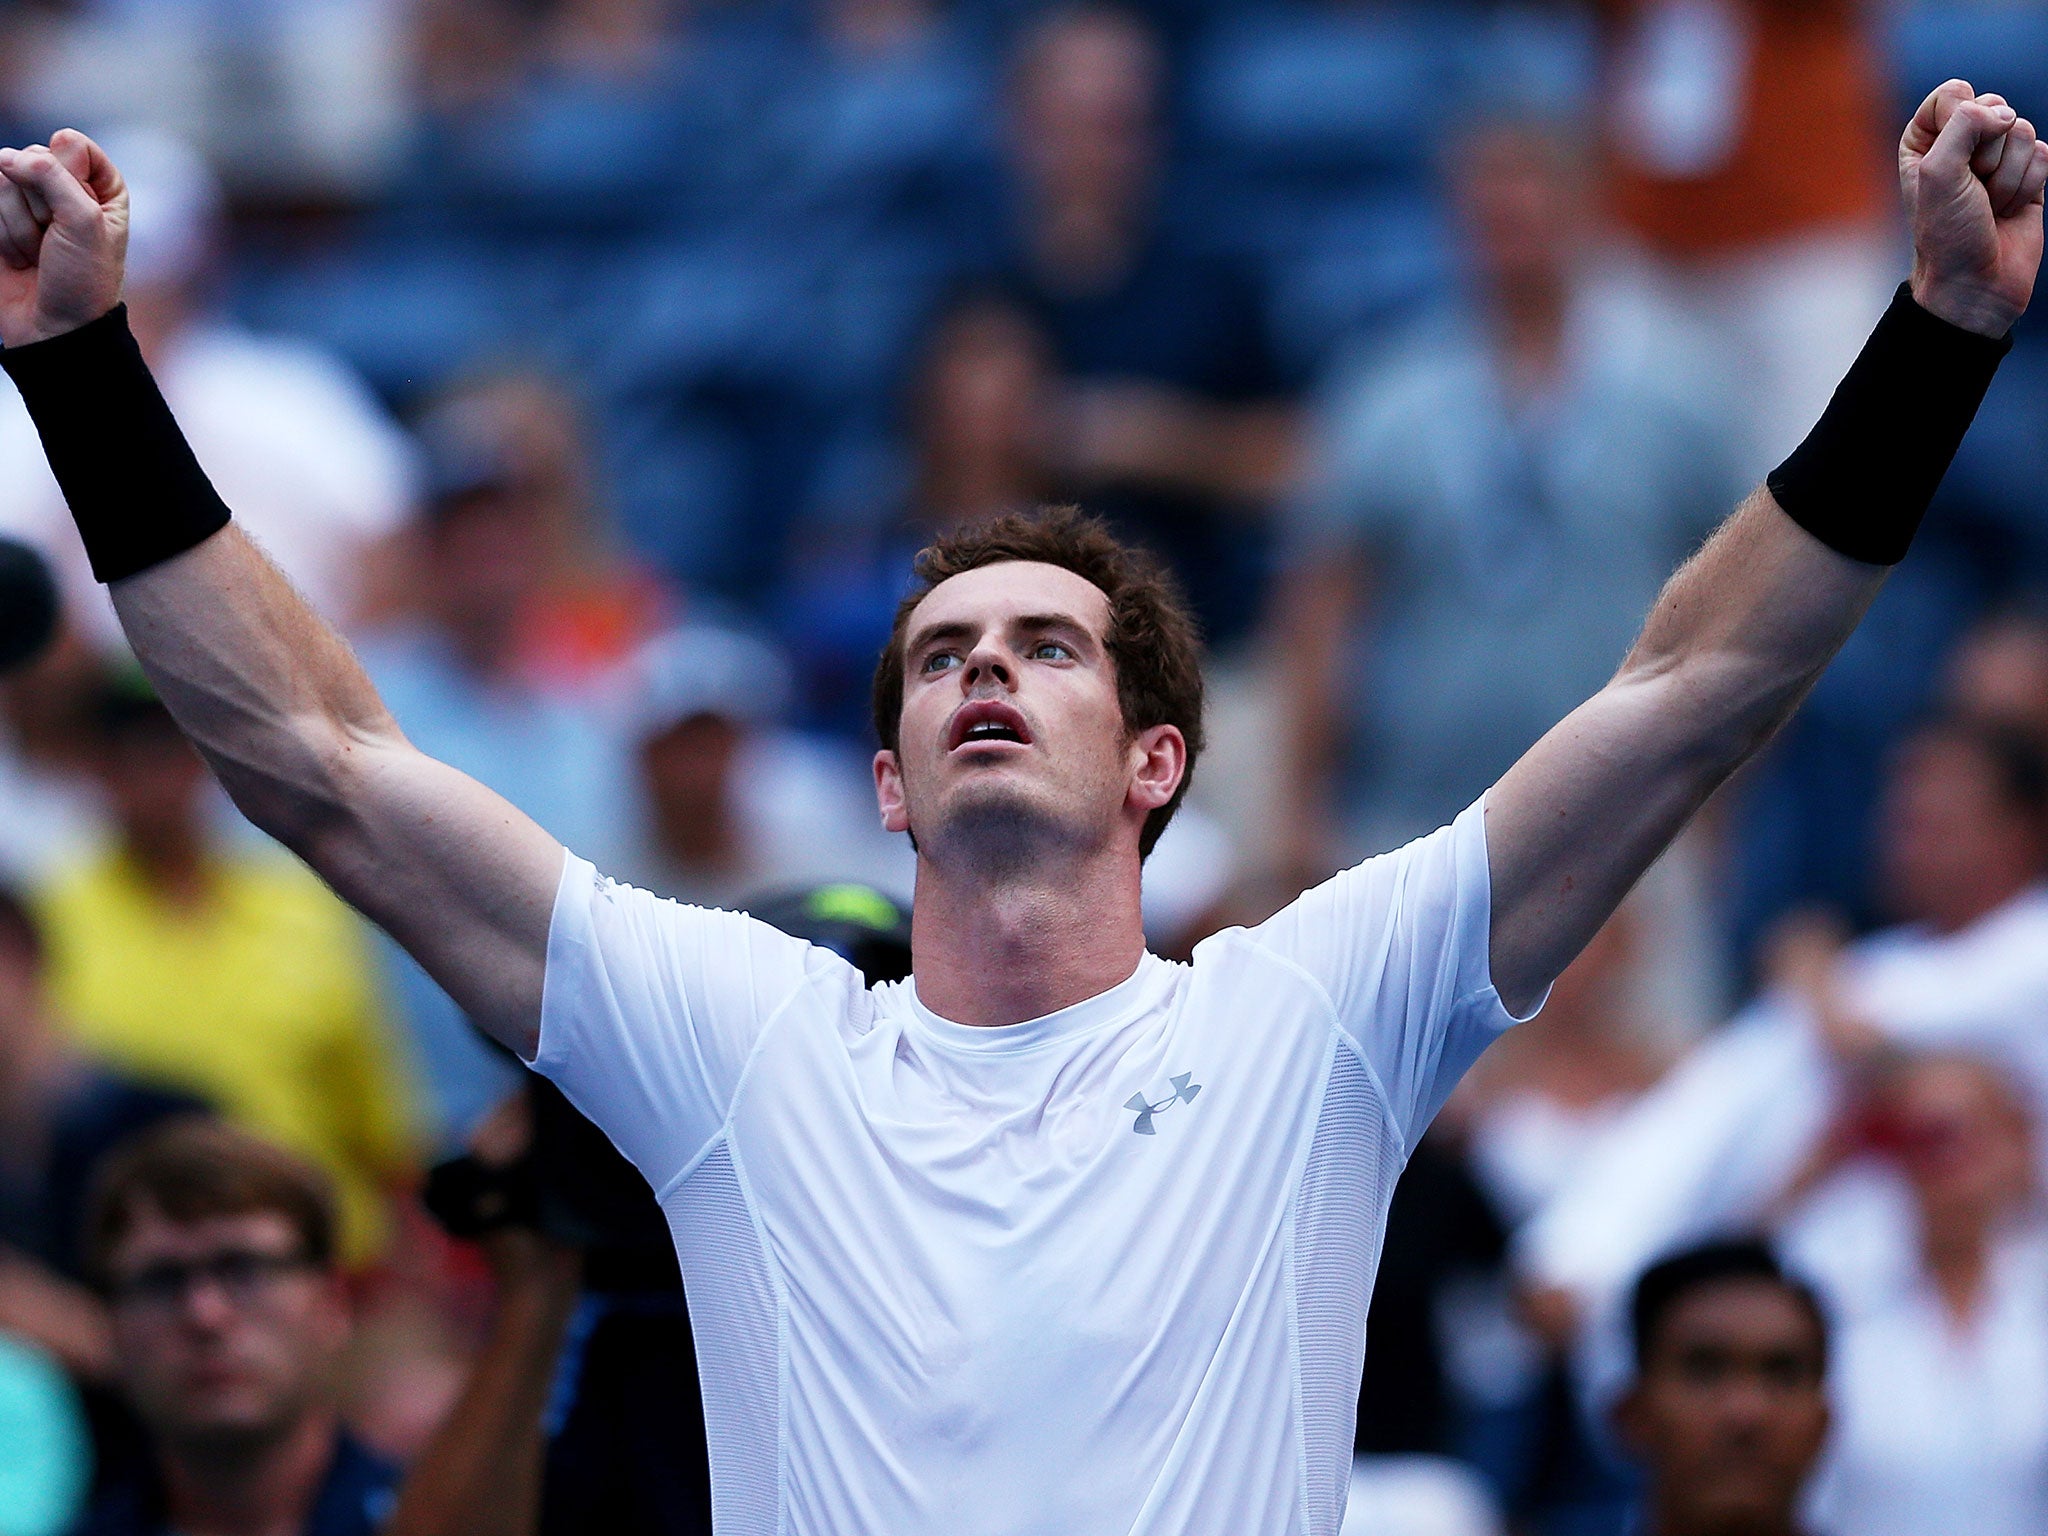 Andy Murray of Great Britain celebrates after defeating Adrian Mannarino of France in their Men's Singles Second Round match on Day Four of the 2015 US Open